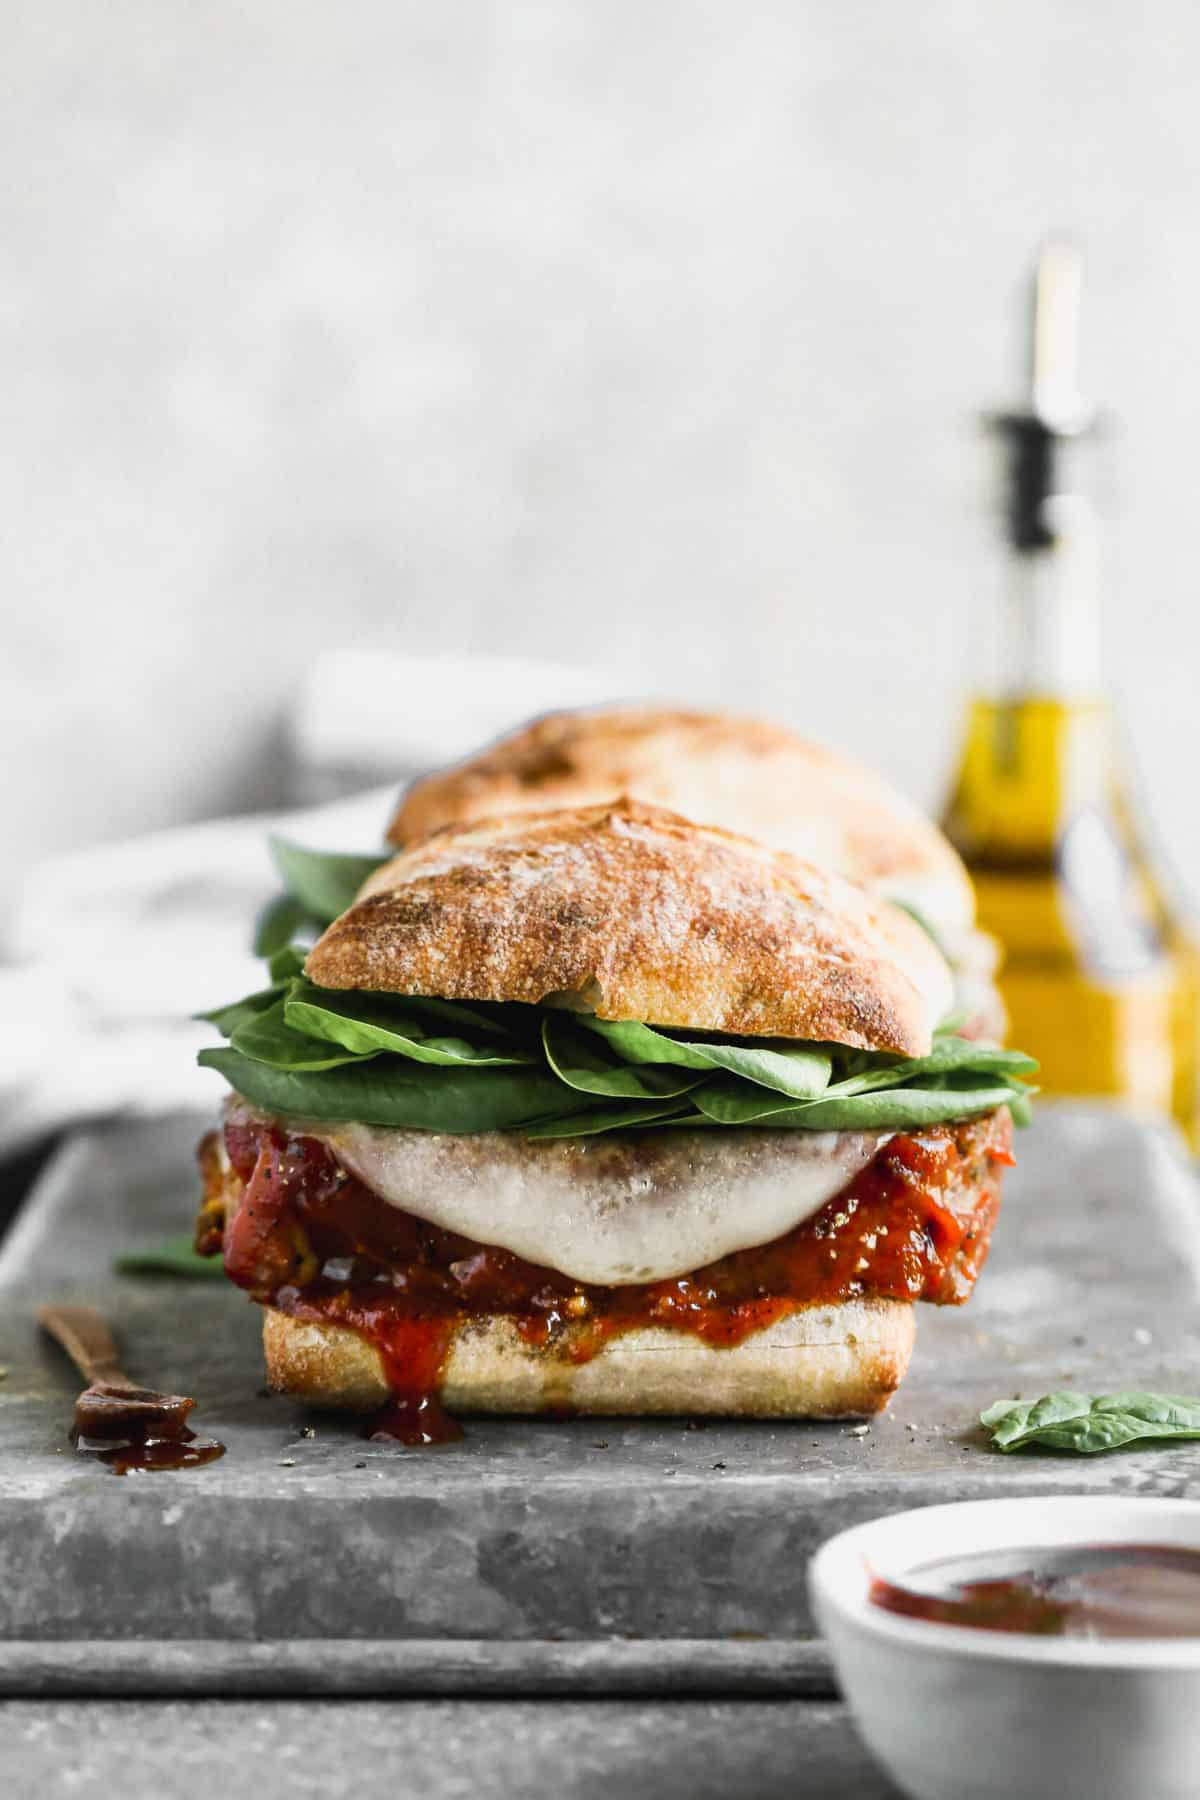 A cold meatloaf sandwich topped with sauce, melted cheese, and spinach on a toasty ciabatta roll.